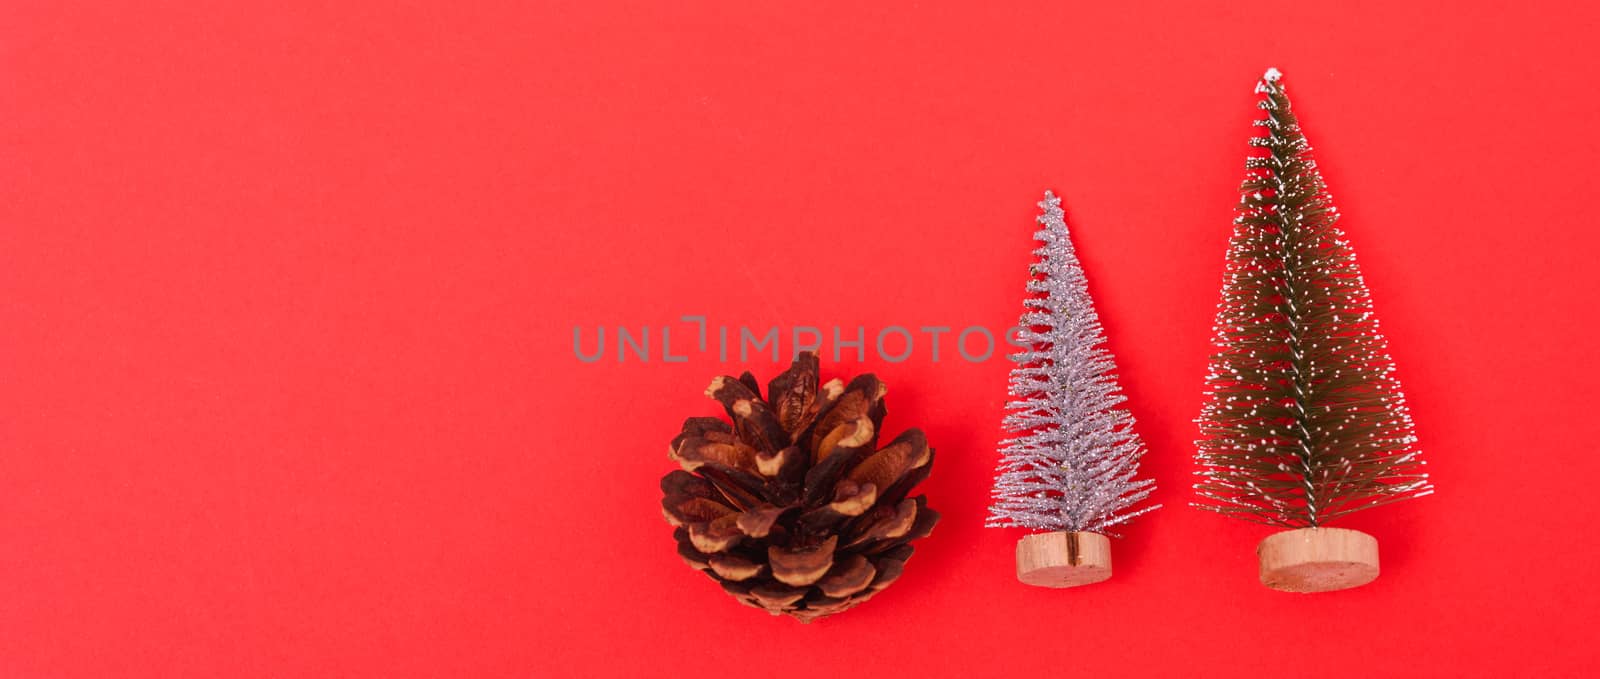 New Year, Christmas Xmas holiday composition, Top view green fir tree branch on red background with copy space